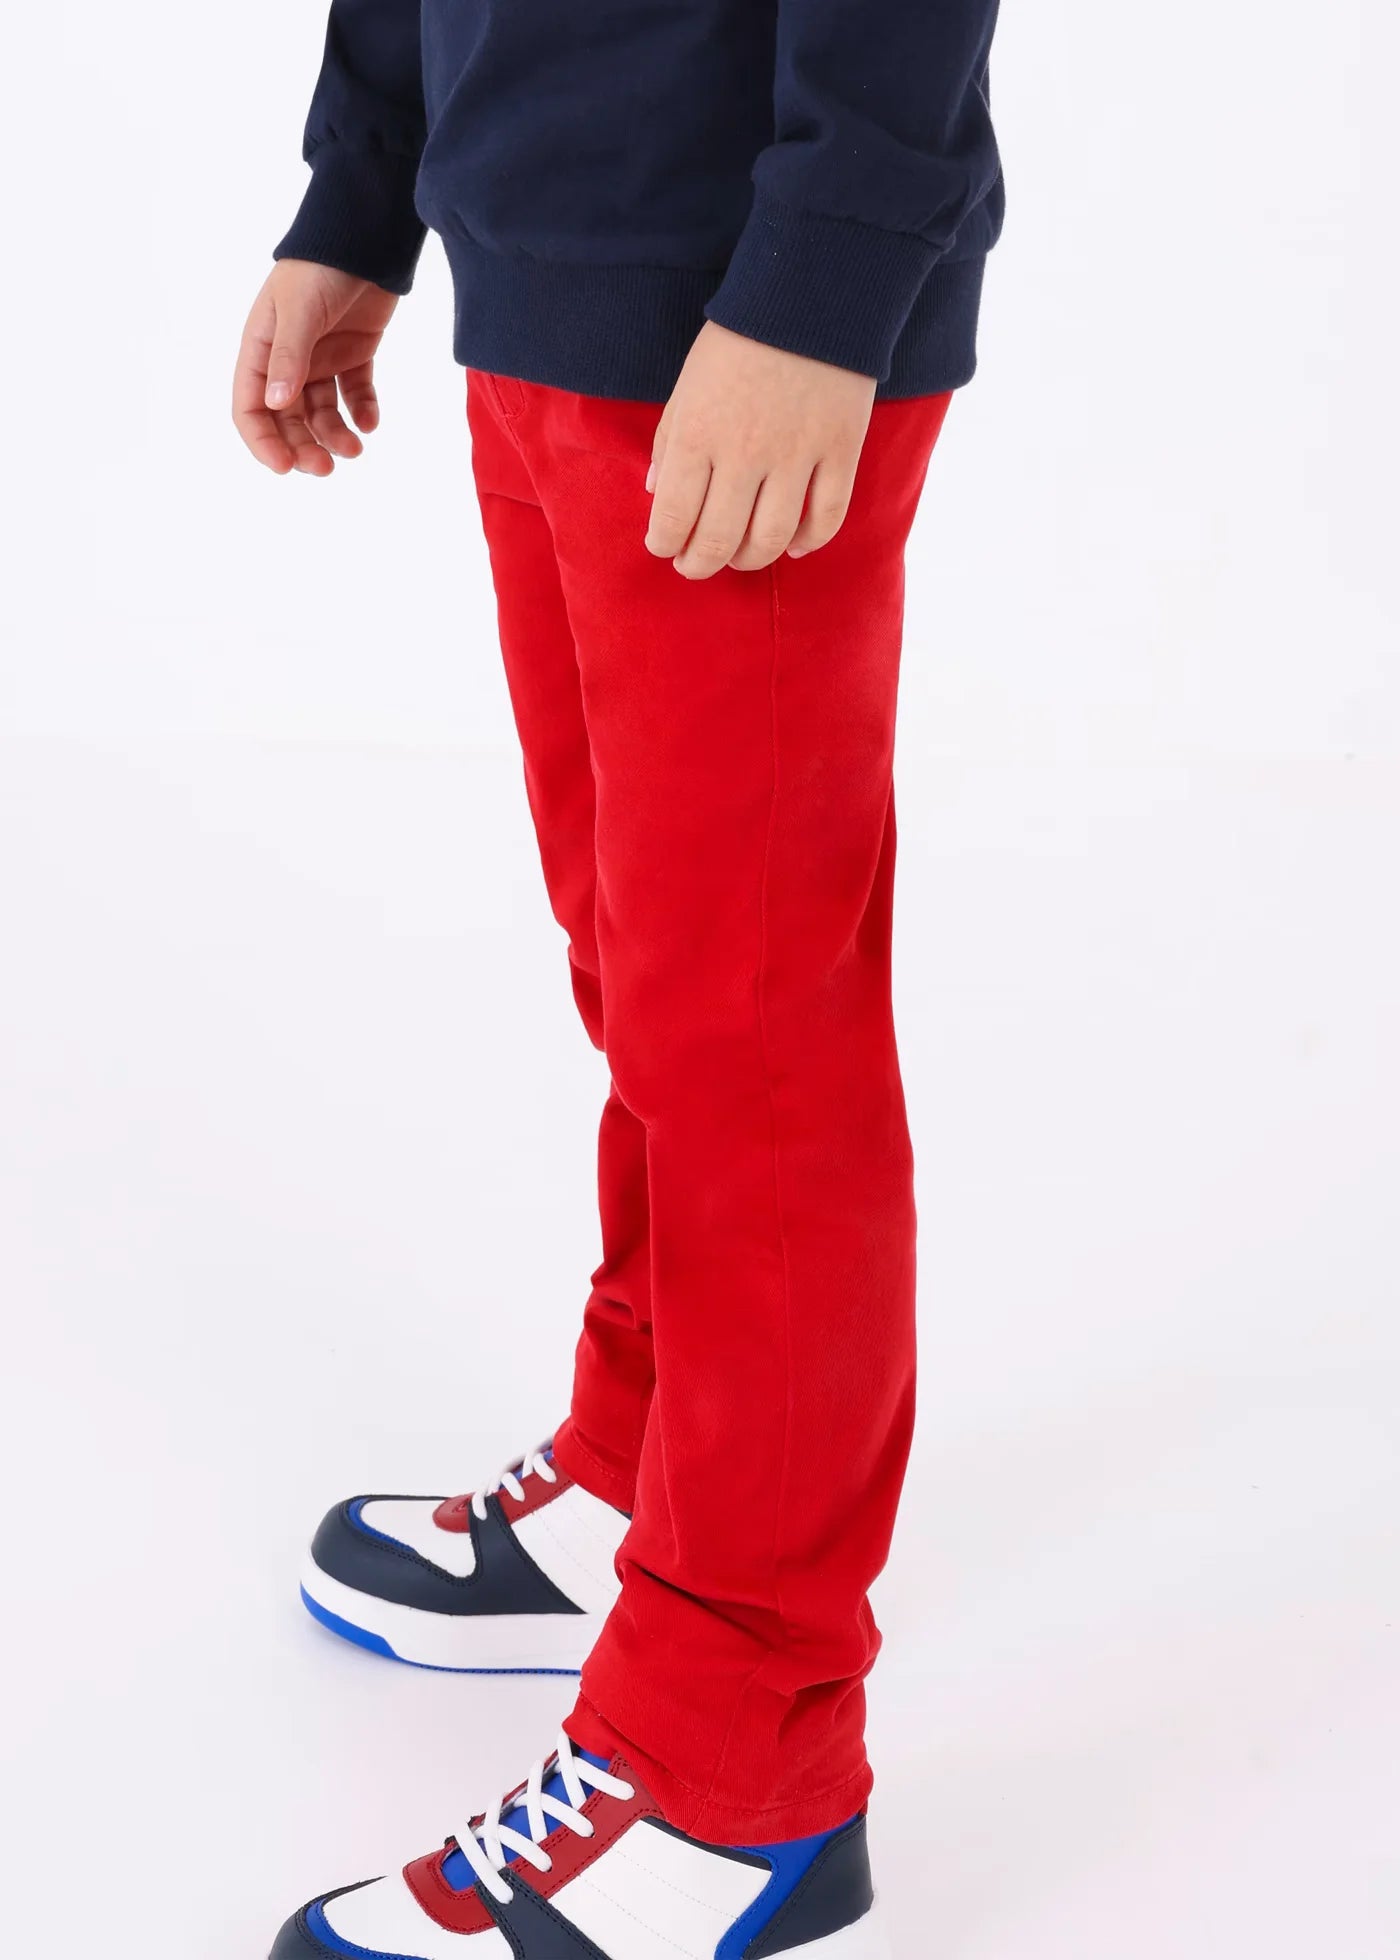 red chino pants for kids